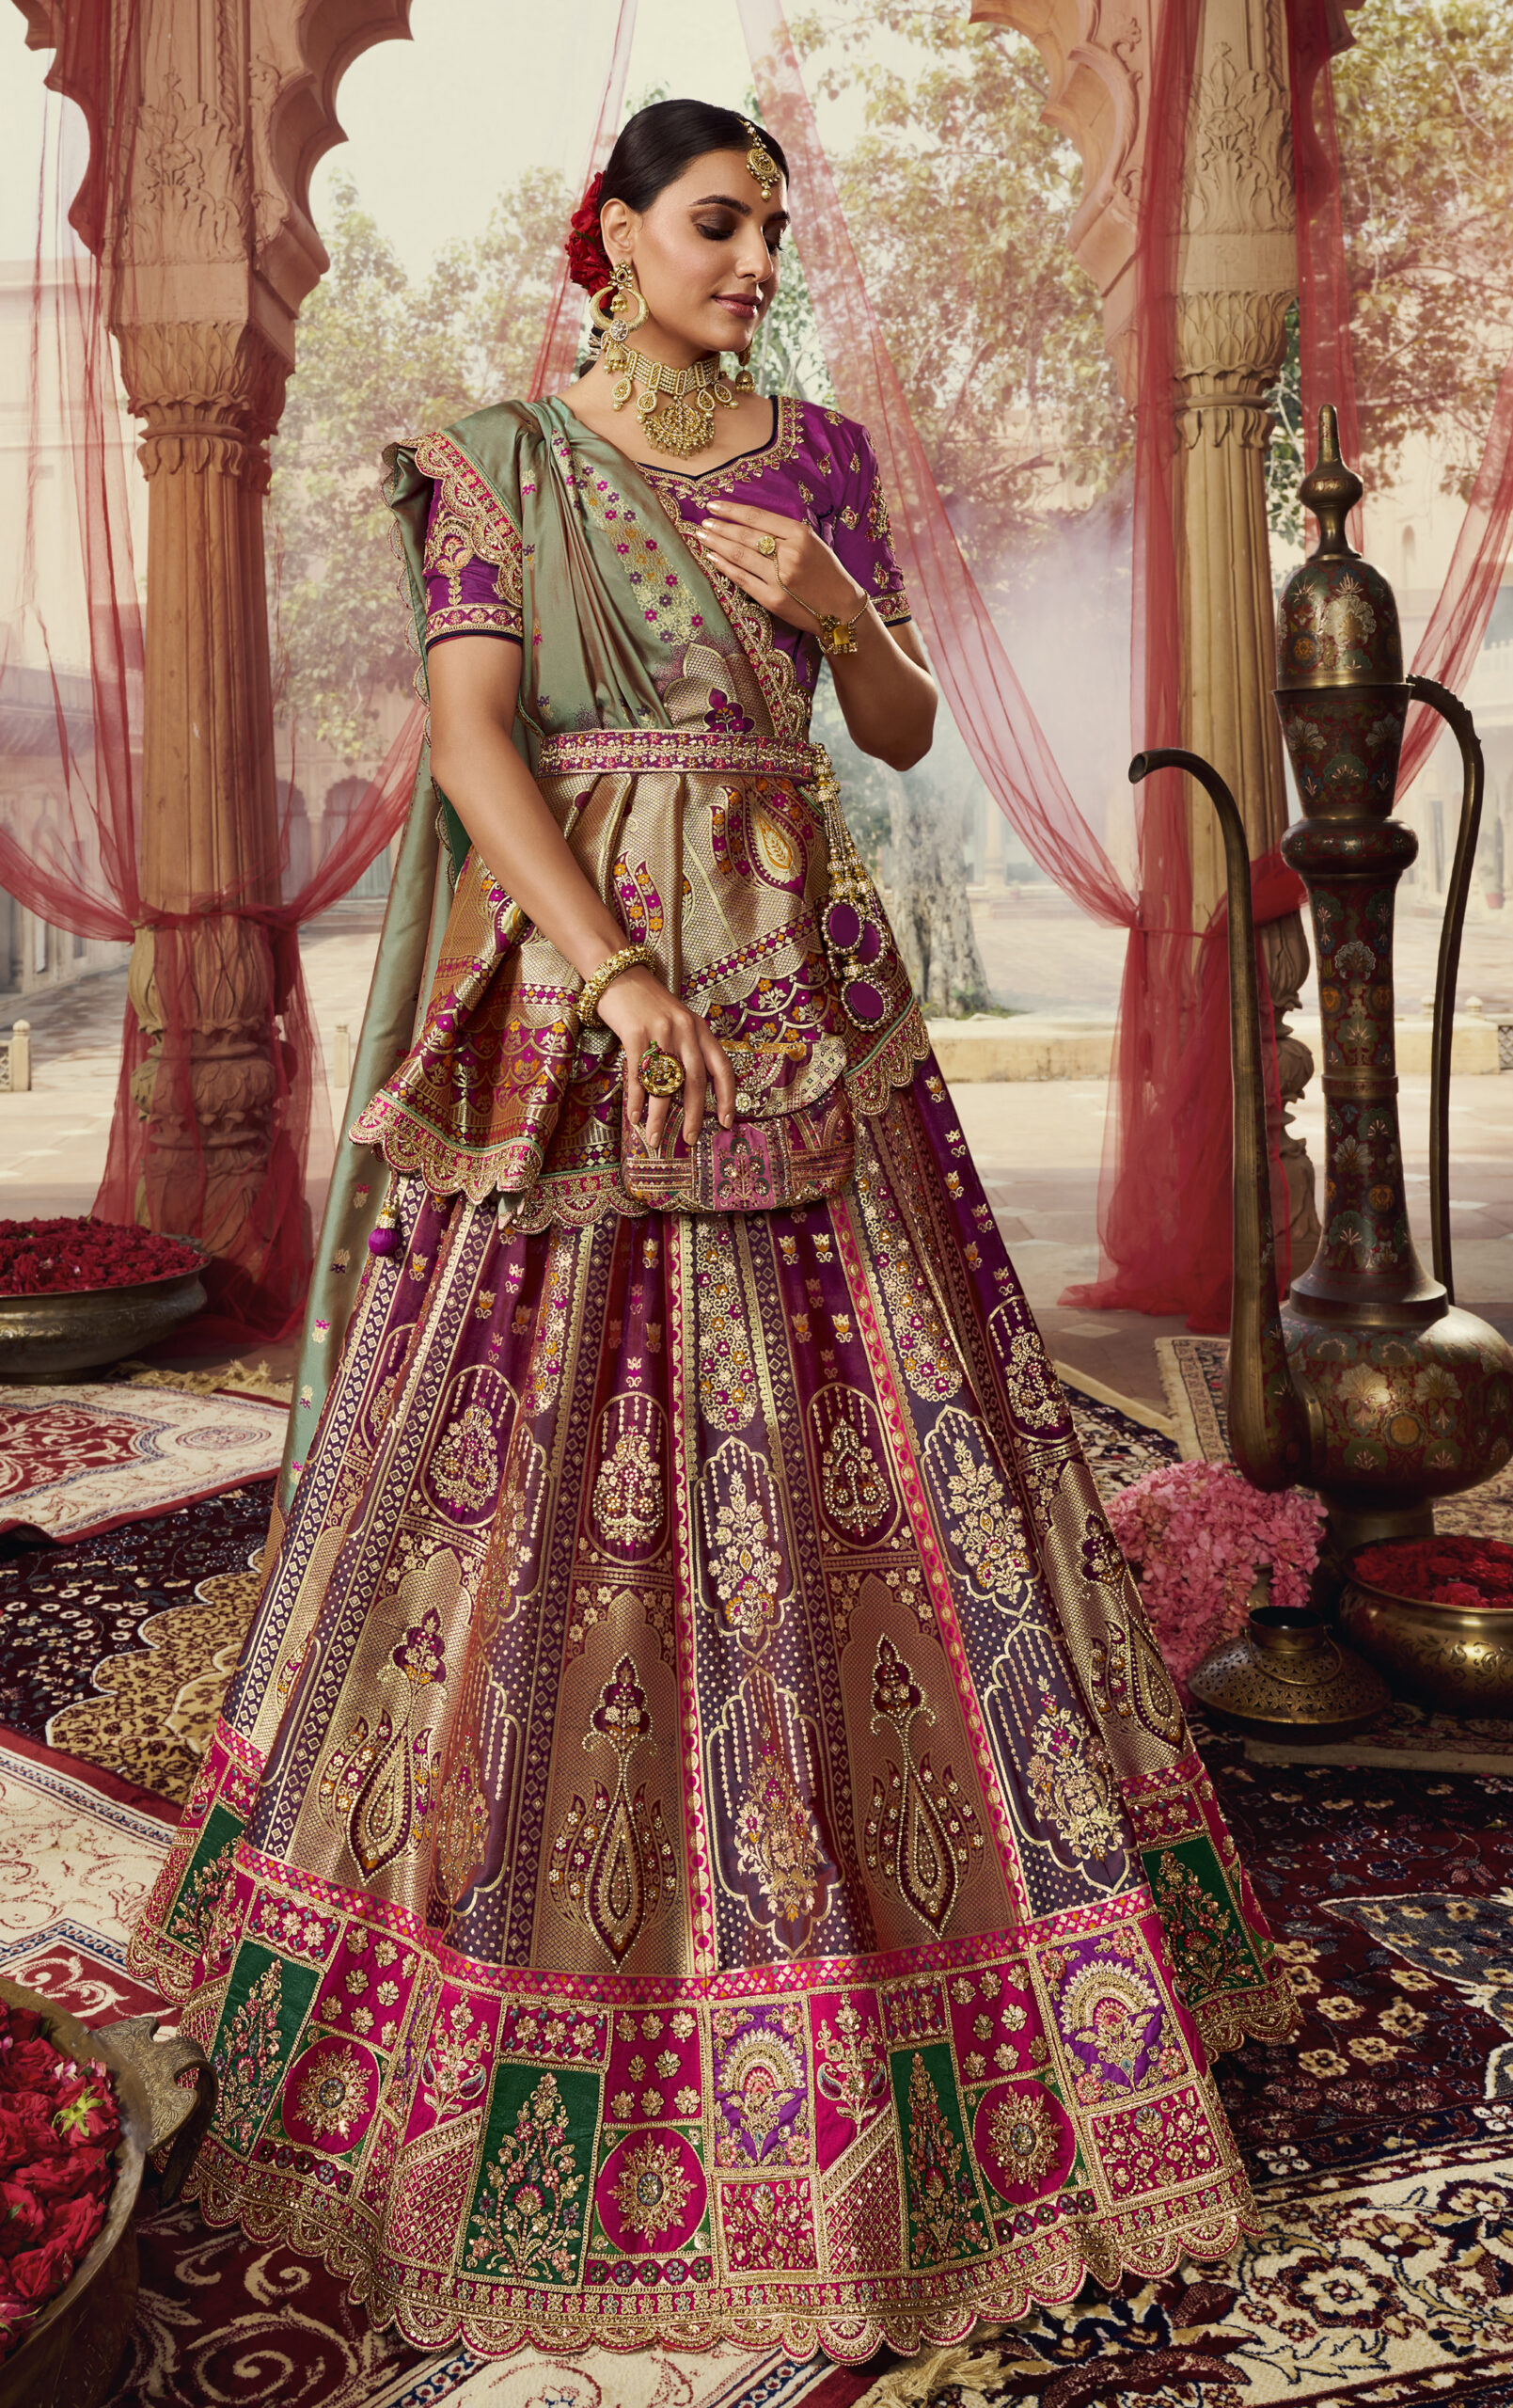 2021 Wedding Lehengas Trend is All About Embracing Earthy Tones - Wish N Wed